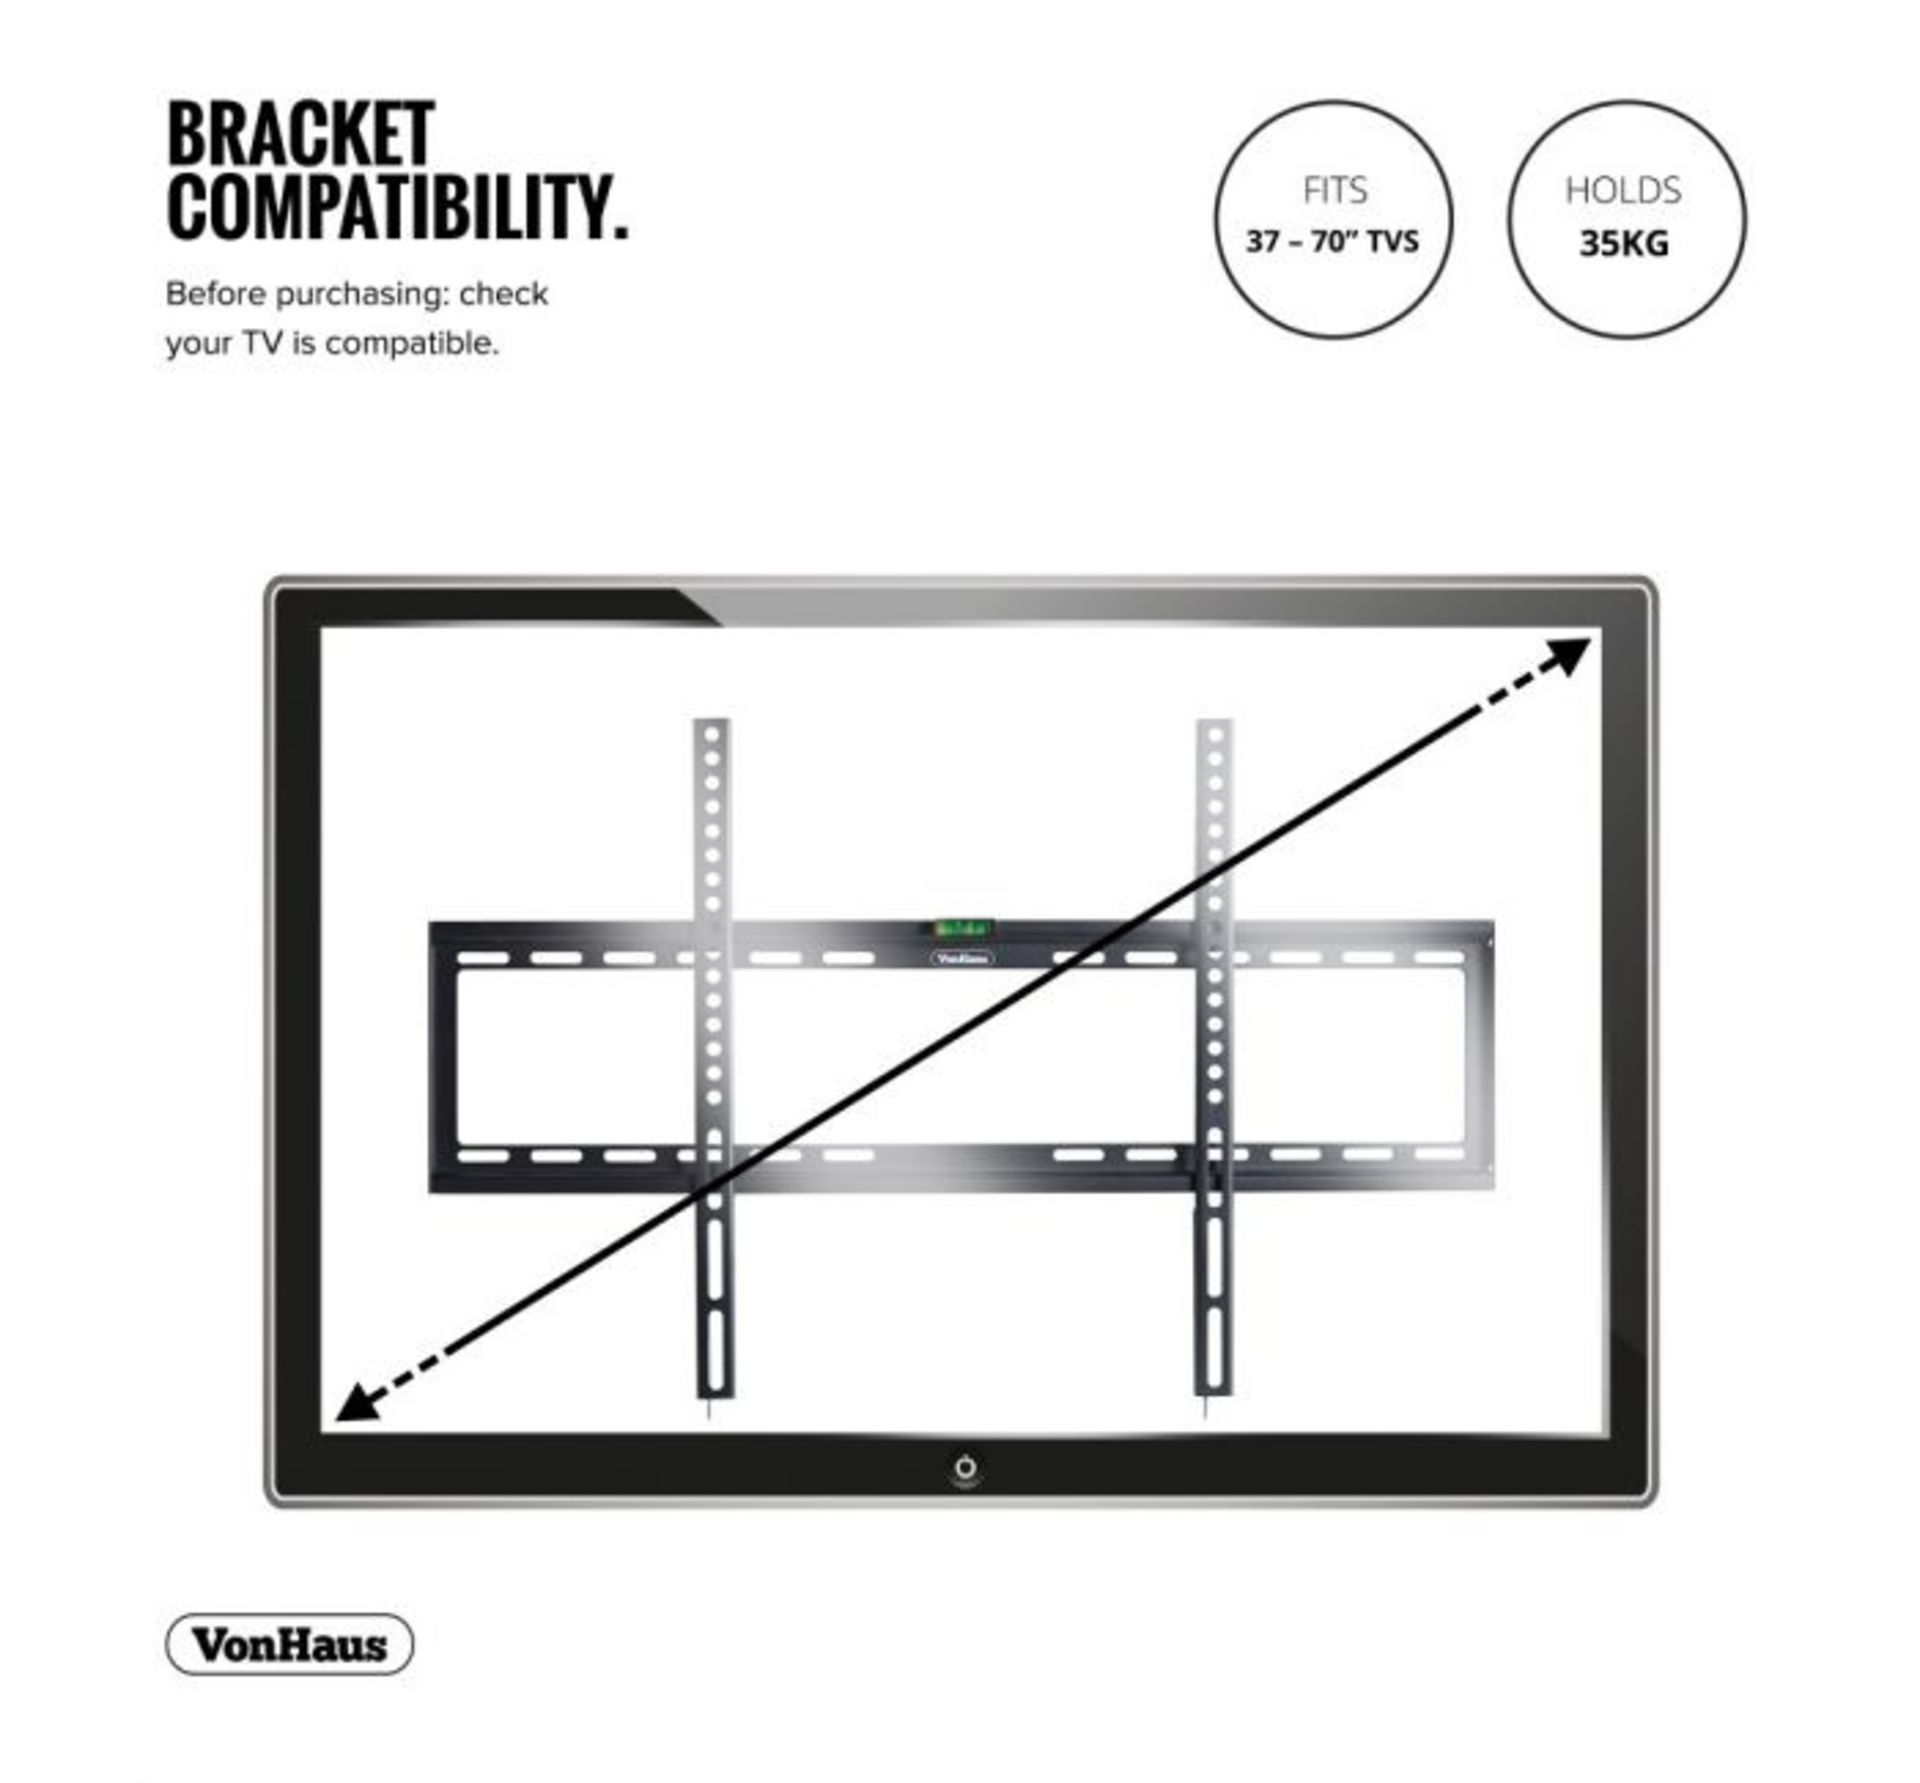 (HZ110) 37-70 inch Flat-to-wall TV bracket Please confirm your TV’s VESA Mounting Dimensions... - Image 2 of 3